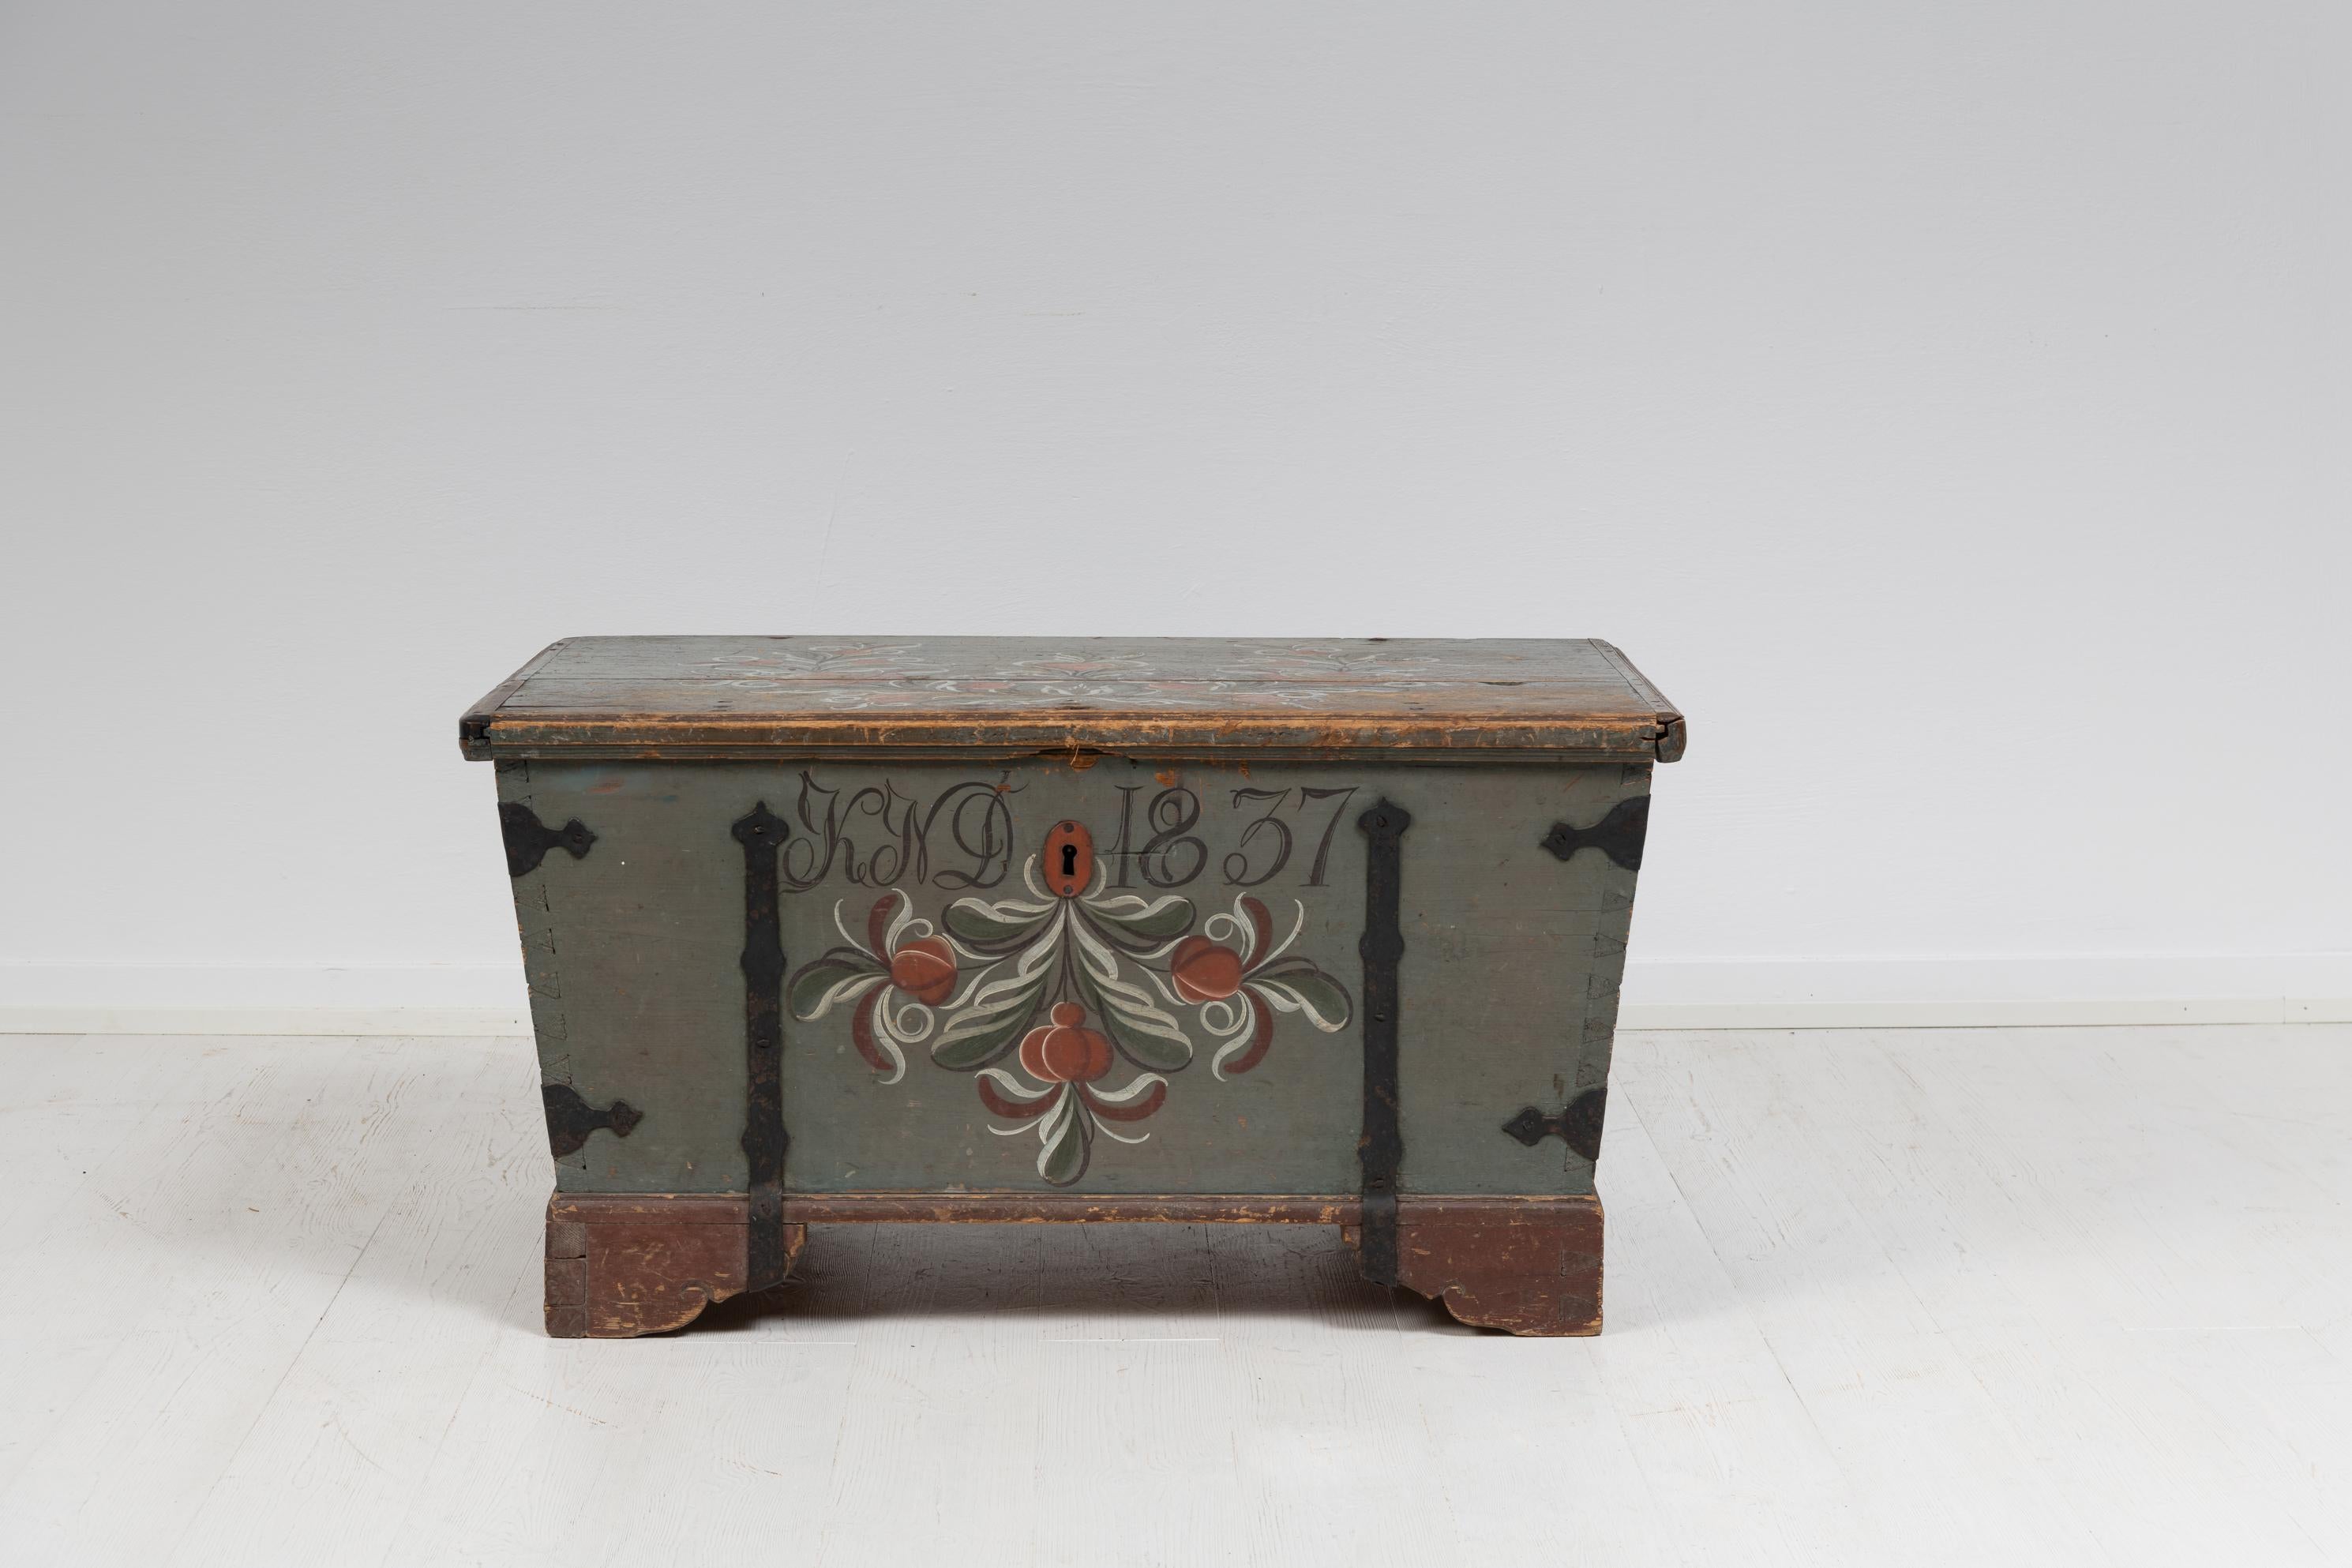 Original painted country chest dated 1837. The chest also has painted initials KND where the D stands for Dotter, meaning daughter. At the time last names where not inherited but made up of the father first name and with the suffix -son for sons or